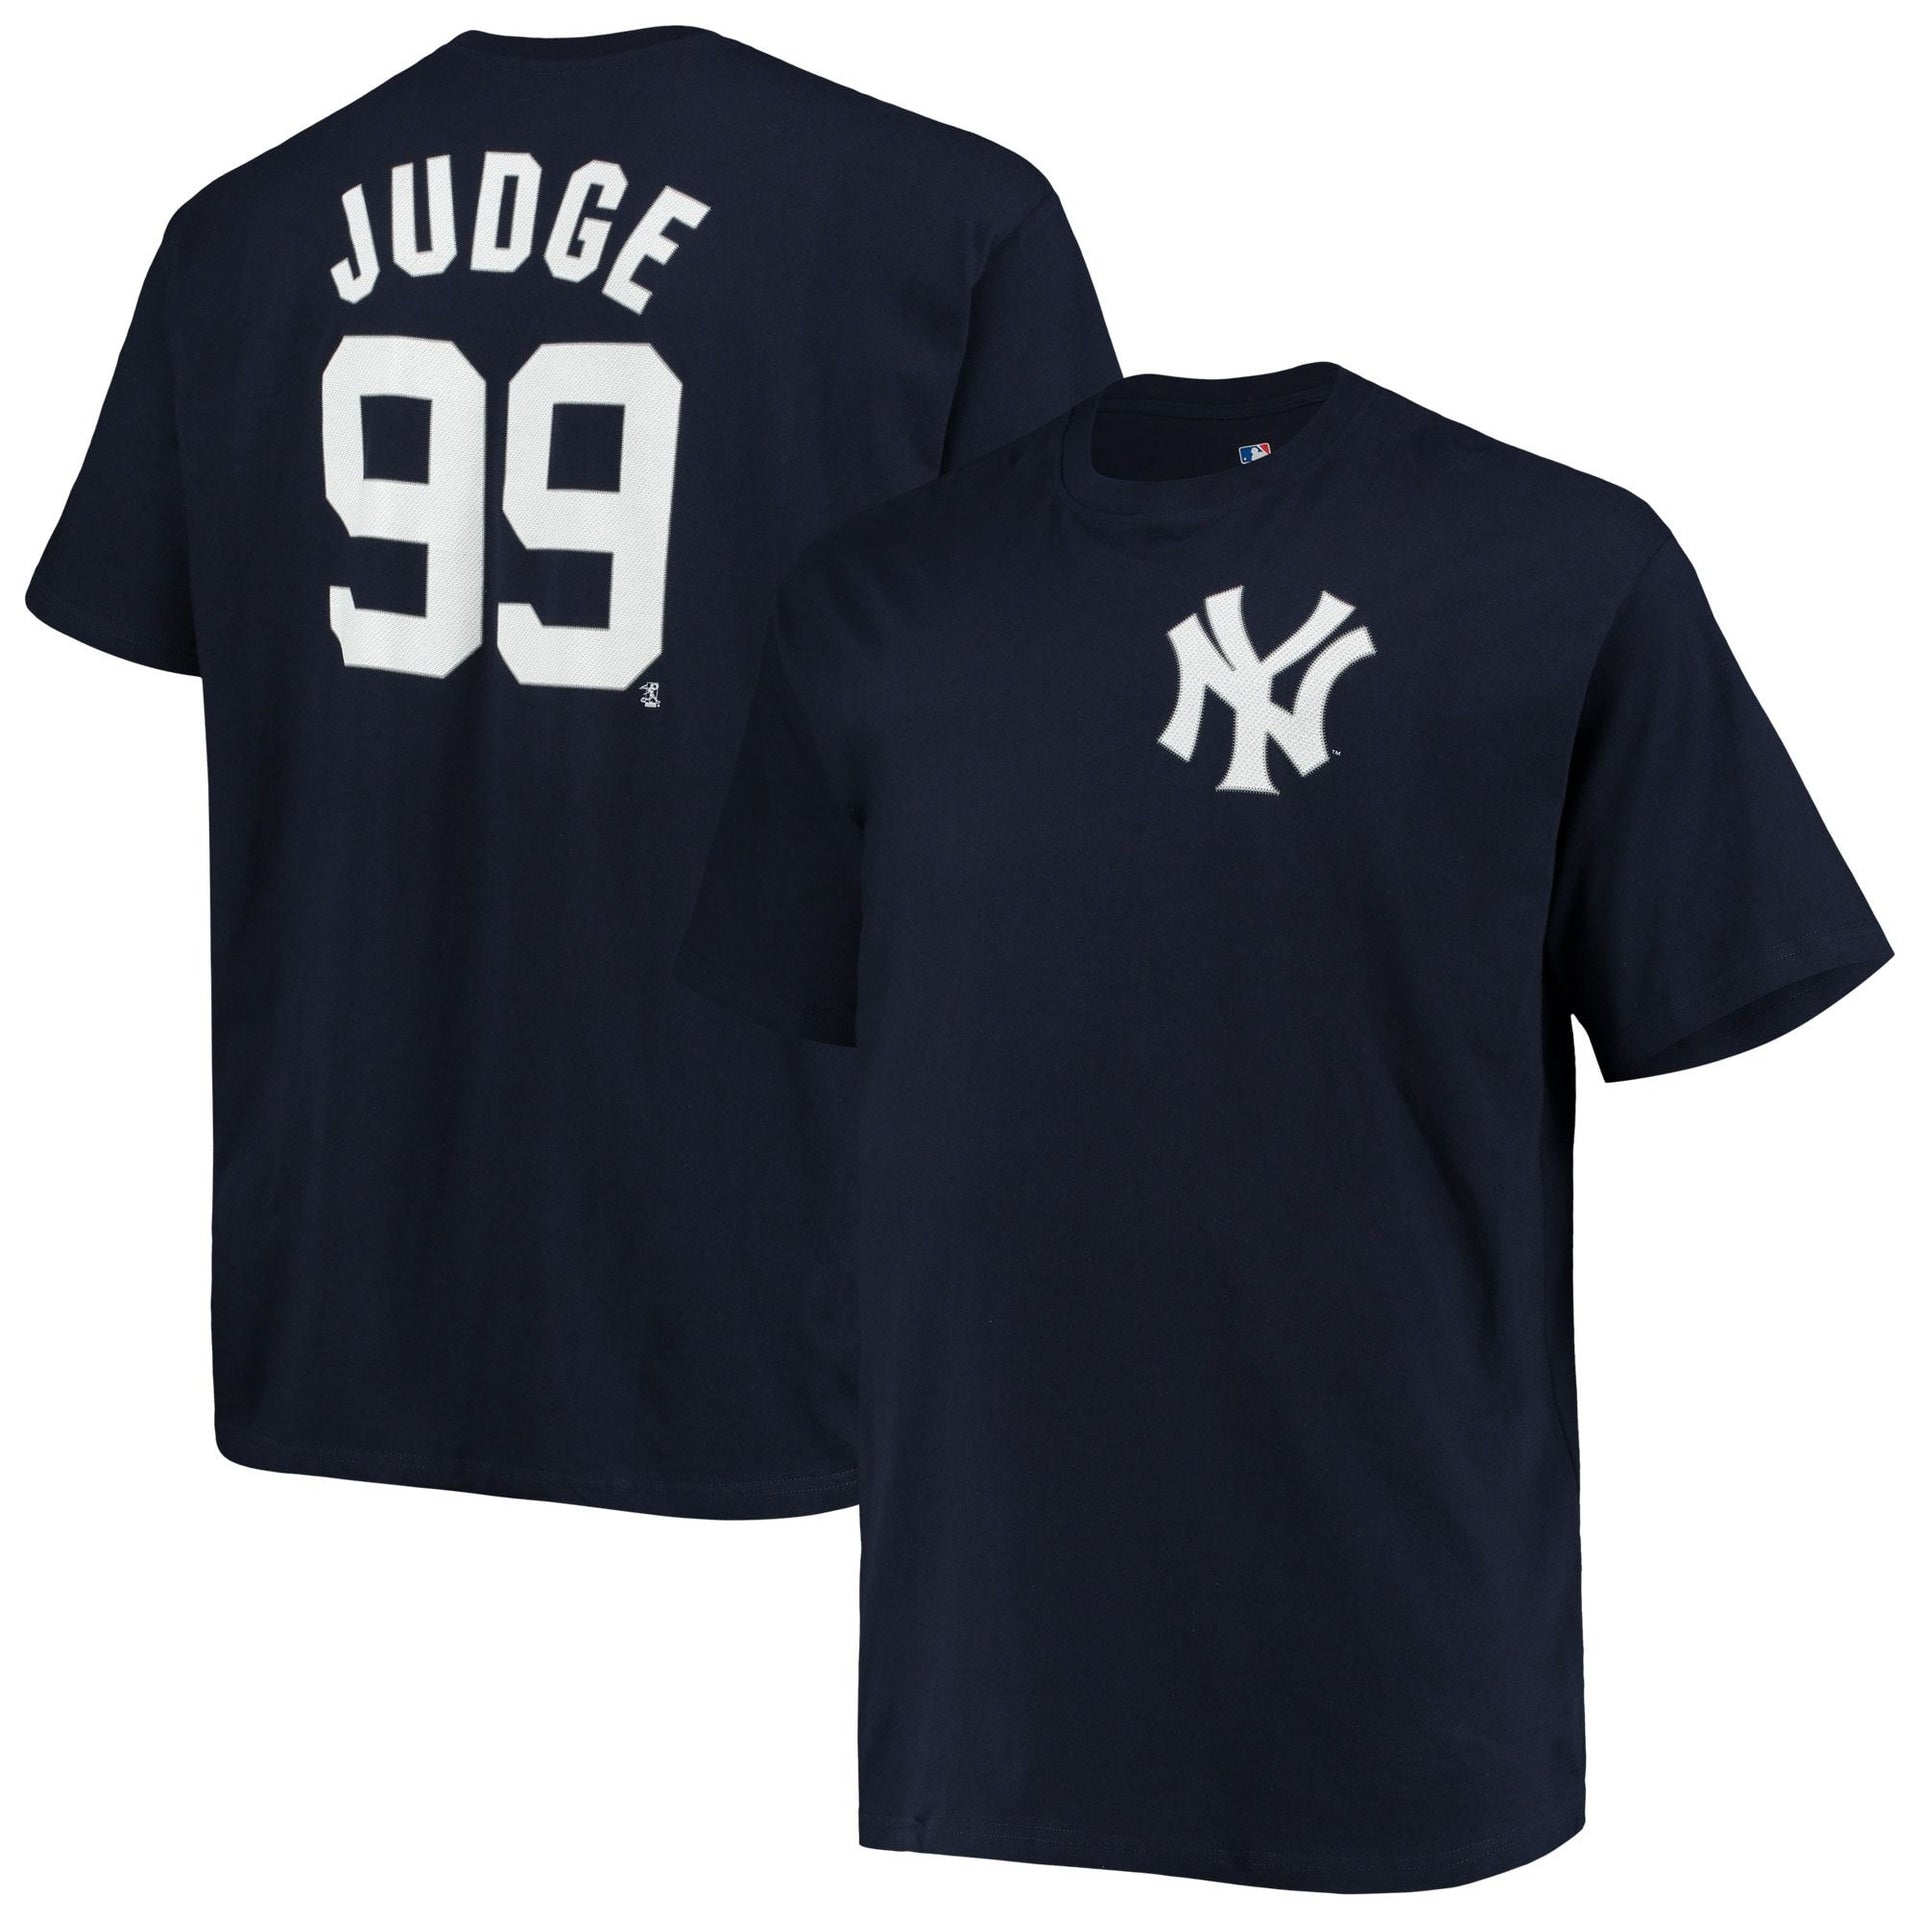 New York Yankees Personalized Home Jersey by Majestic